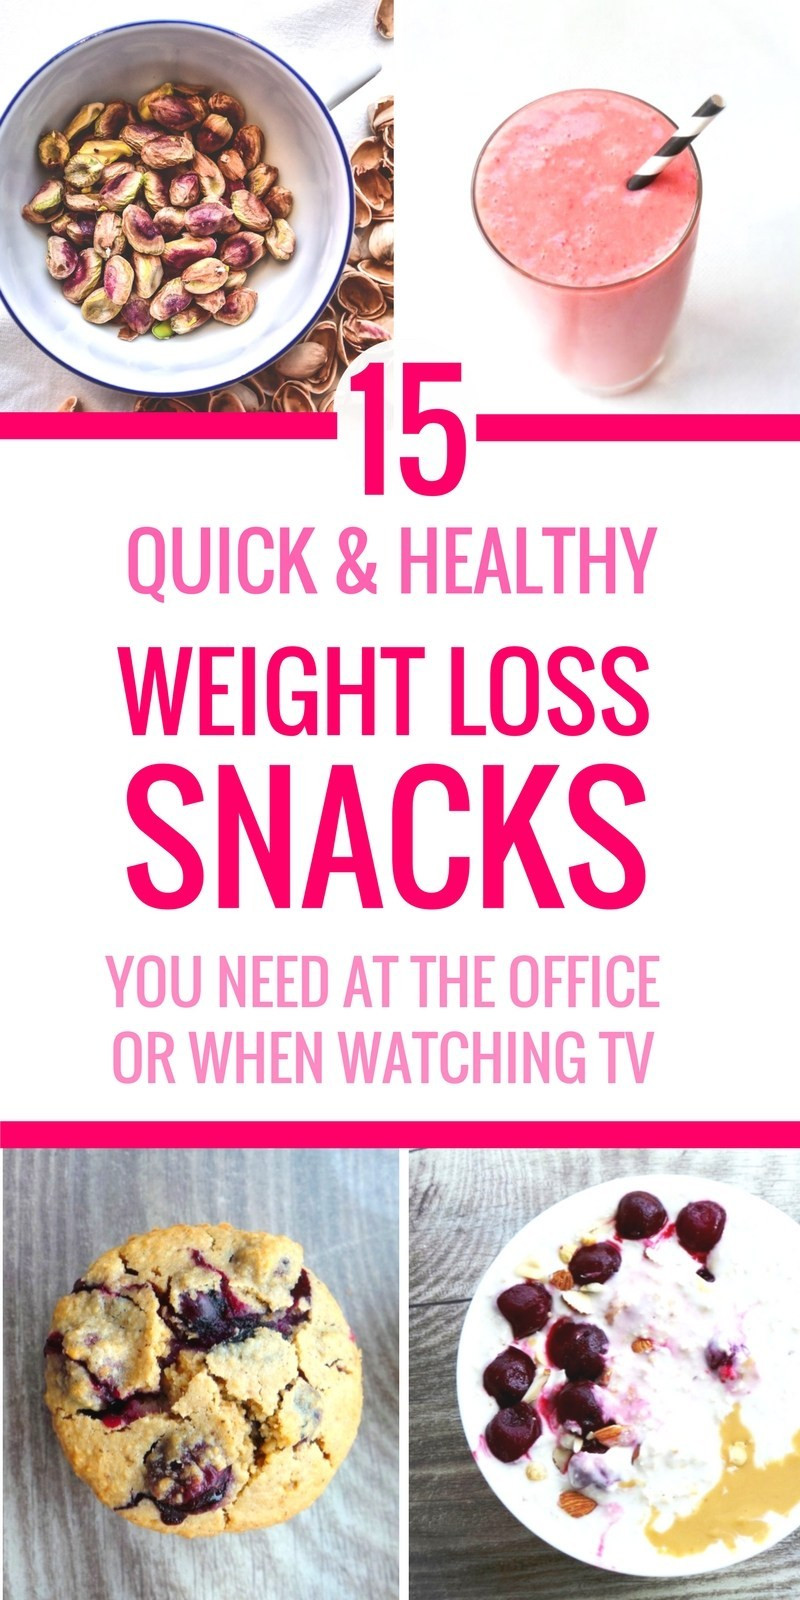 Easy Healthy Snacks On The Go
 Easy Healthy Snacks The Go At Work or Watching TV